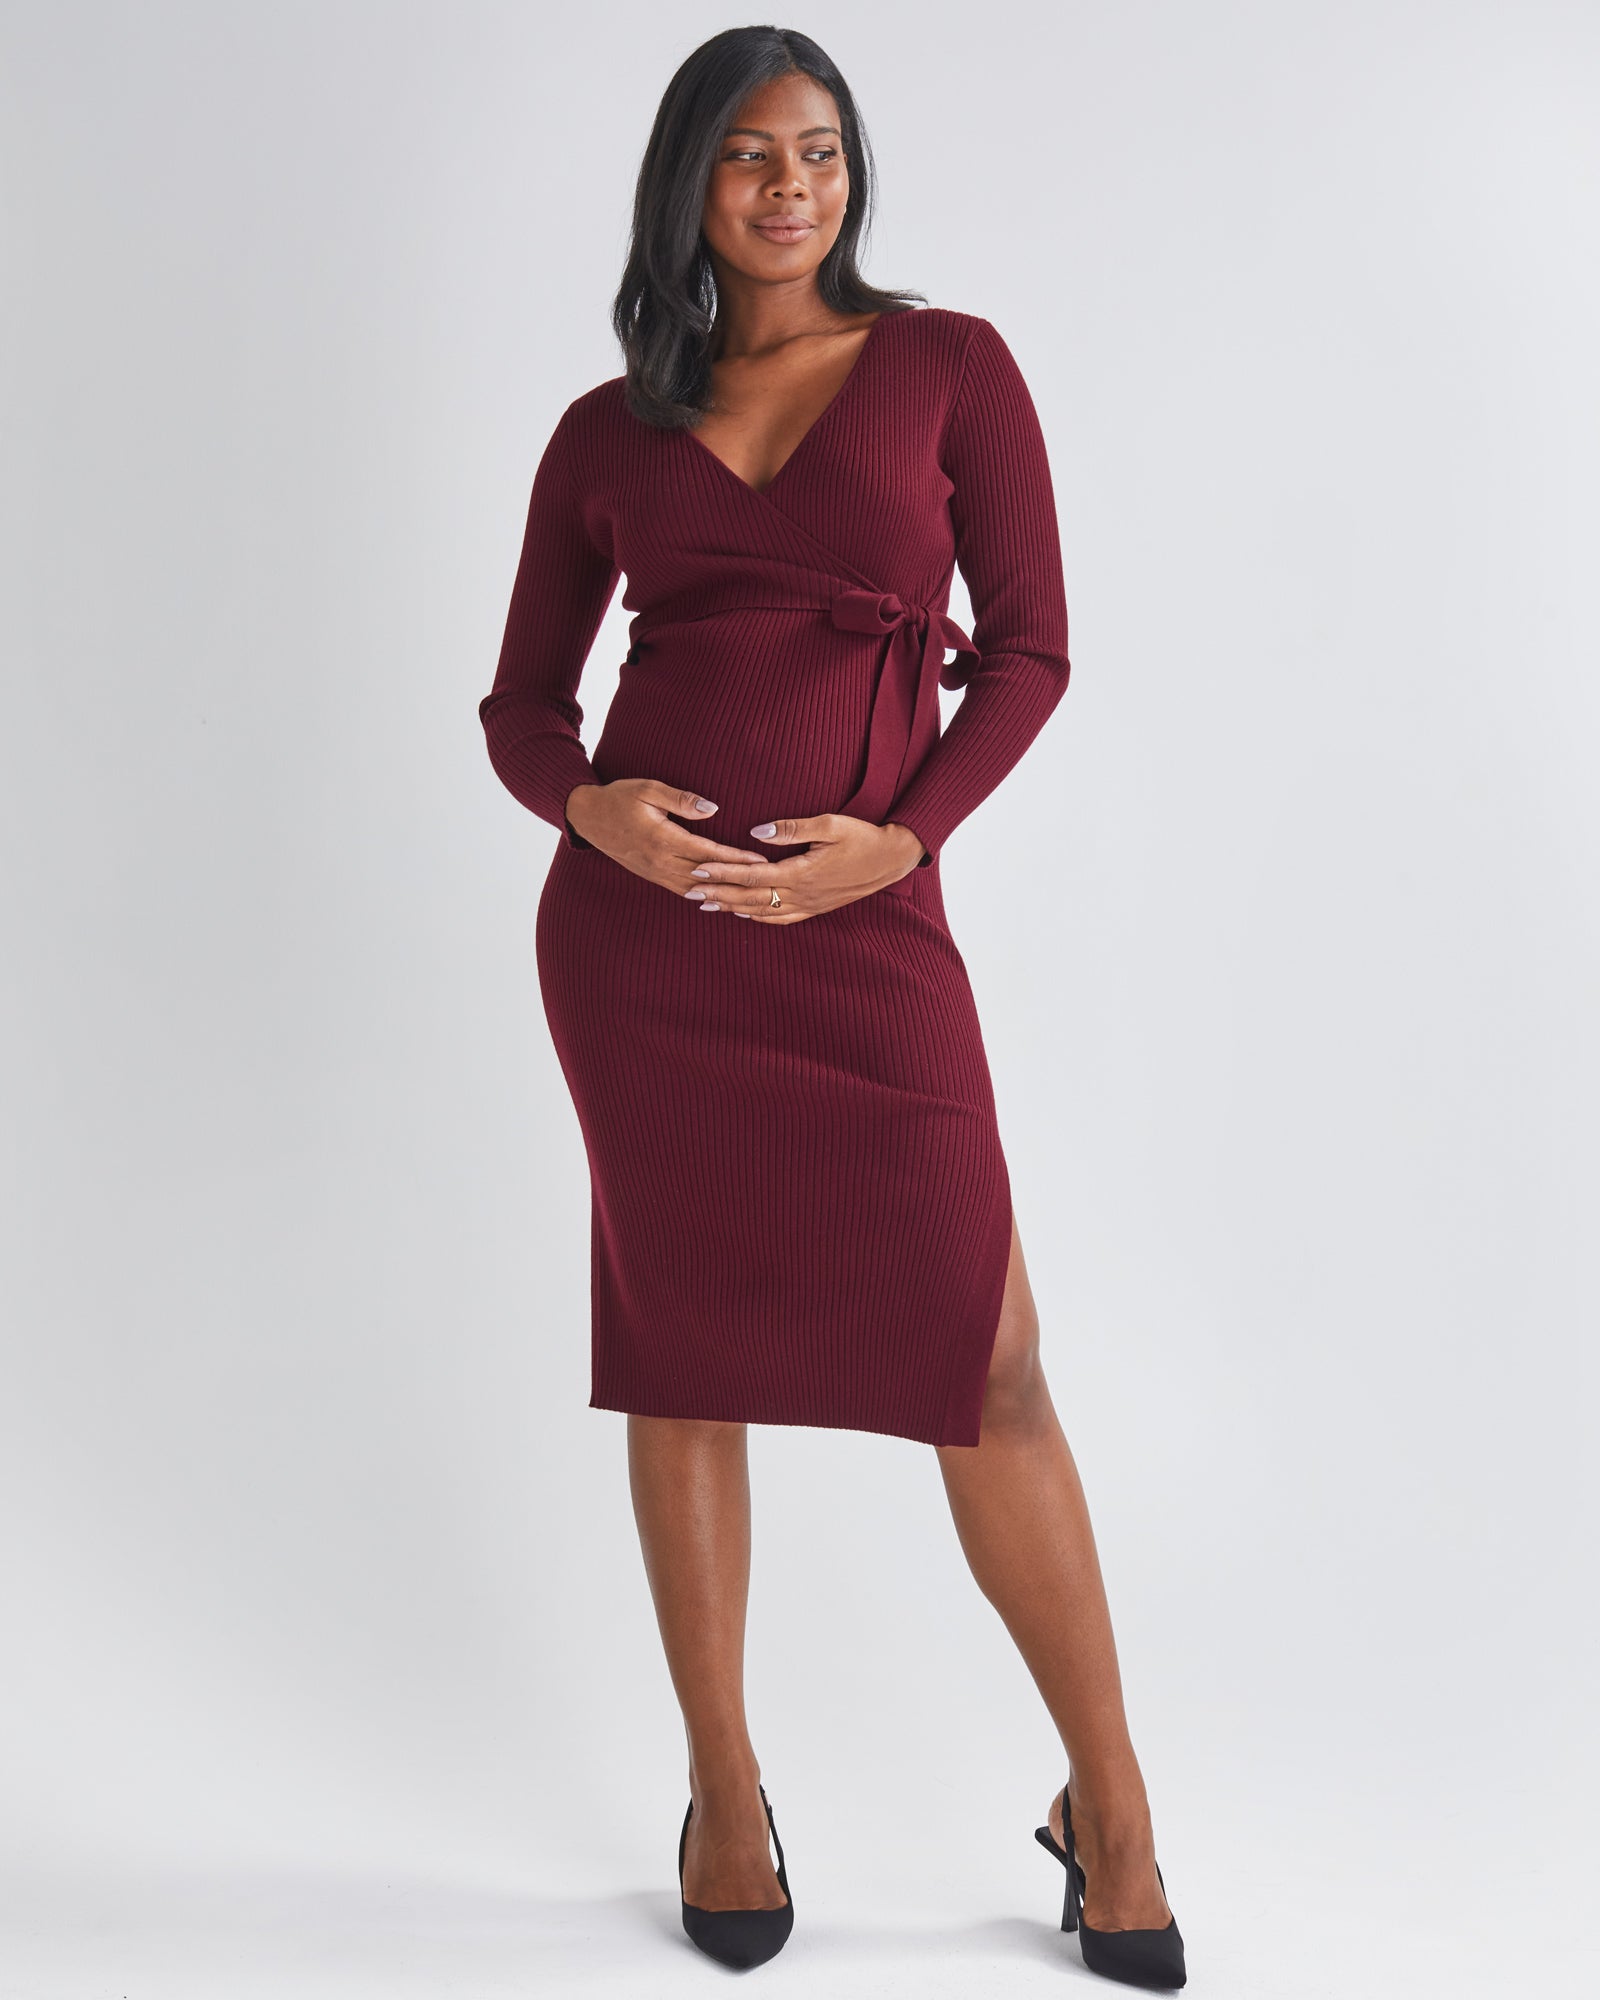 Front View - A Pregnannt Woman Wearing Lucille Full Sleeve Knit Maternity Midi Dress in Burgundy  from Angel Maternity.